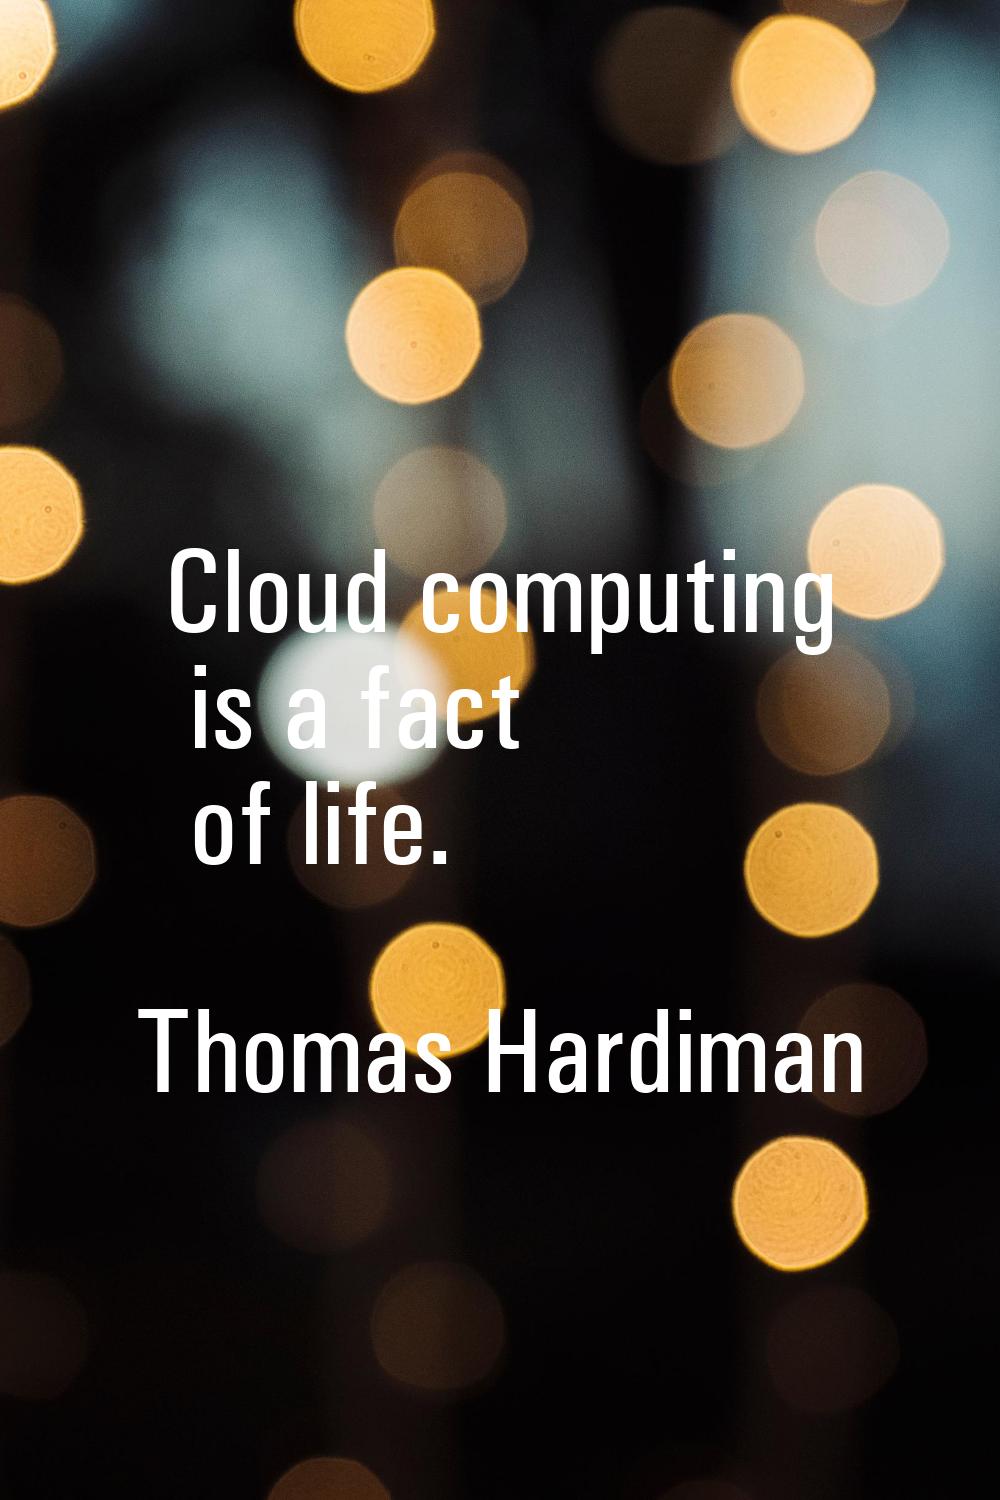 Cloud computing is a fact of life.